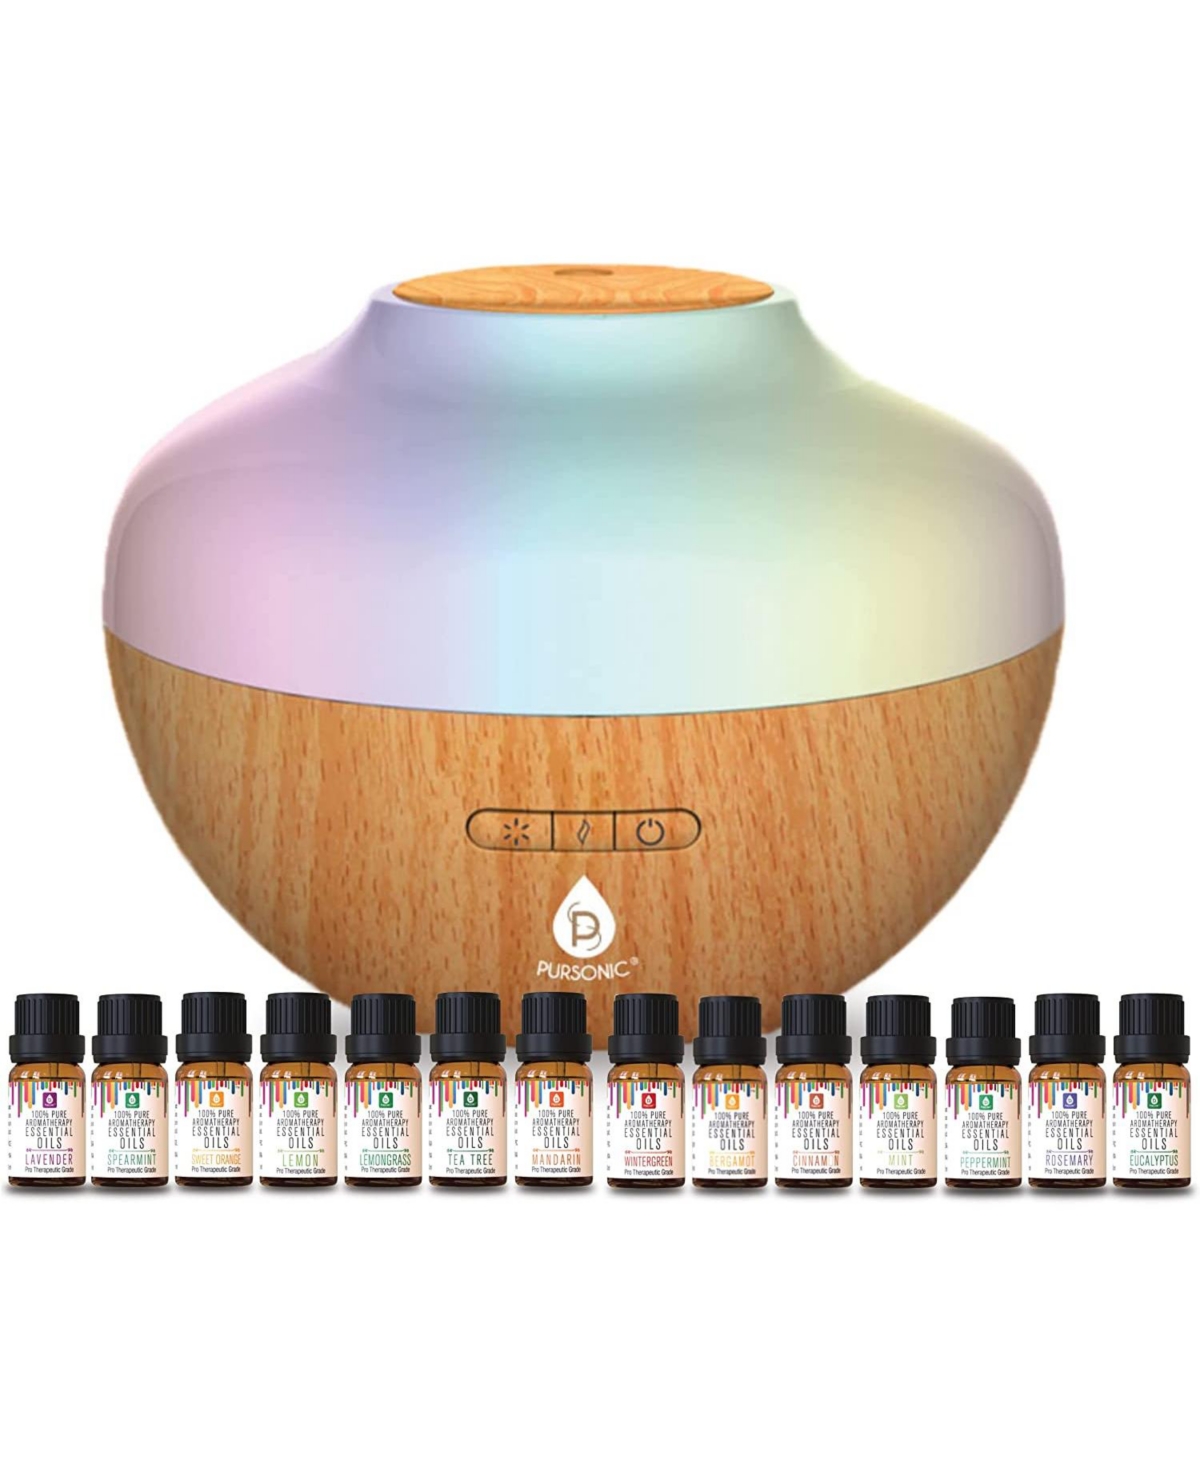 Aromatherapy Diffuser & Essential Oil Set-Ultrasonic Top 14 Oils-300ml with 2 Mist Settings 7 Ambient Light Settings--Therapeutic Grade Oils